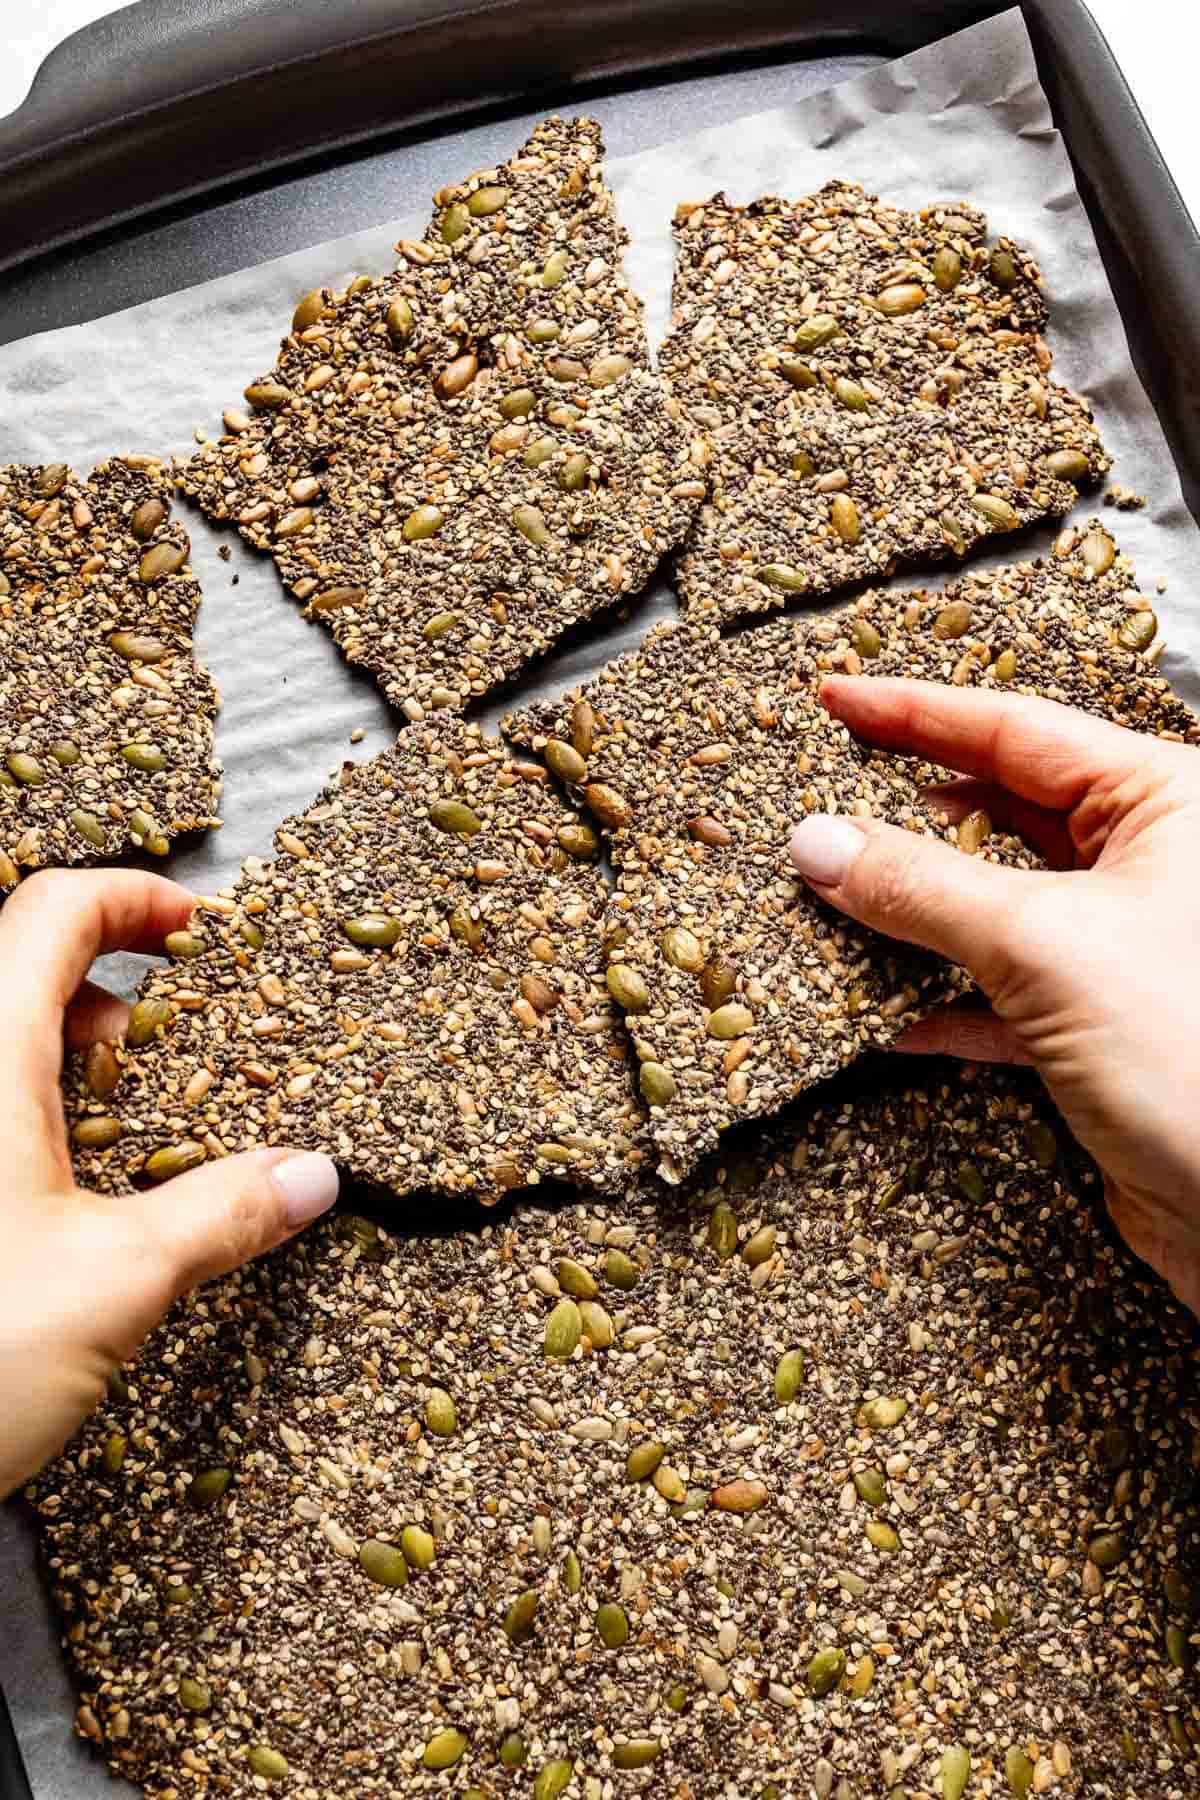 Person cracking seed crackers on a sheet pan.